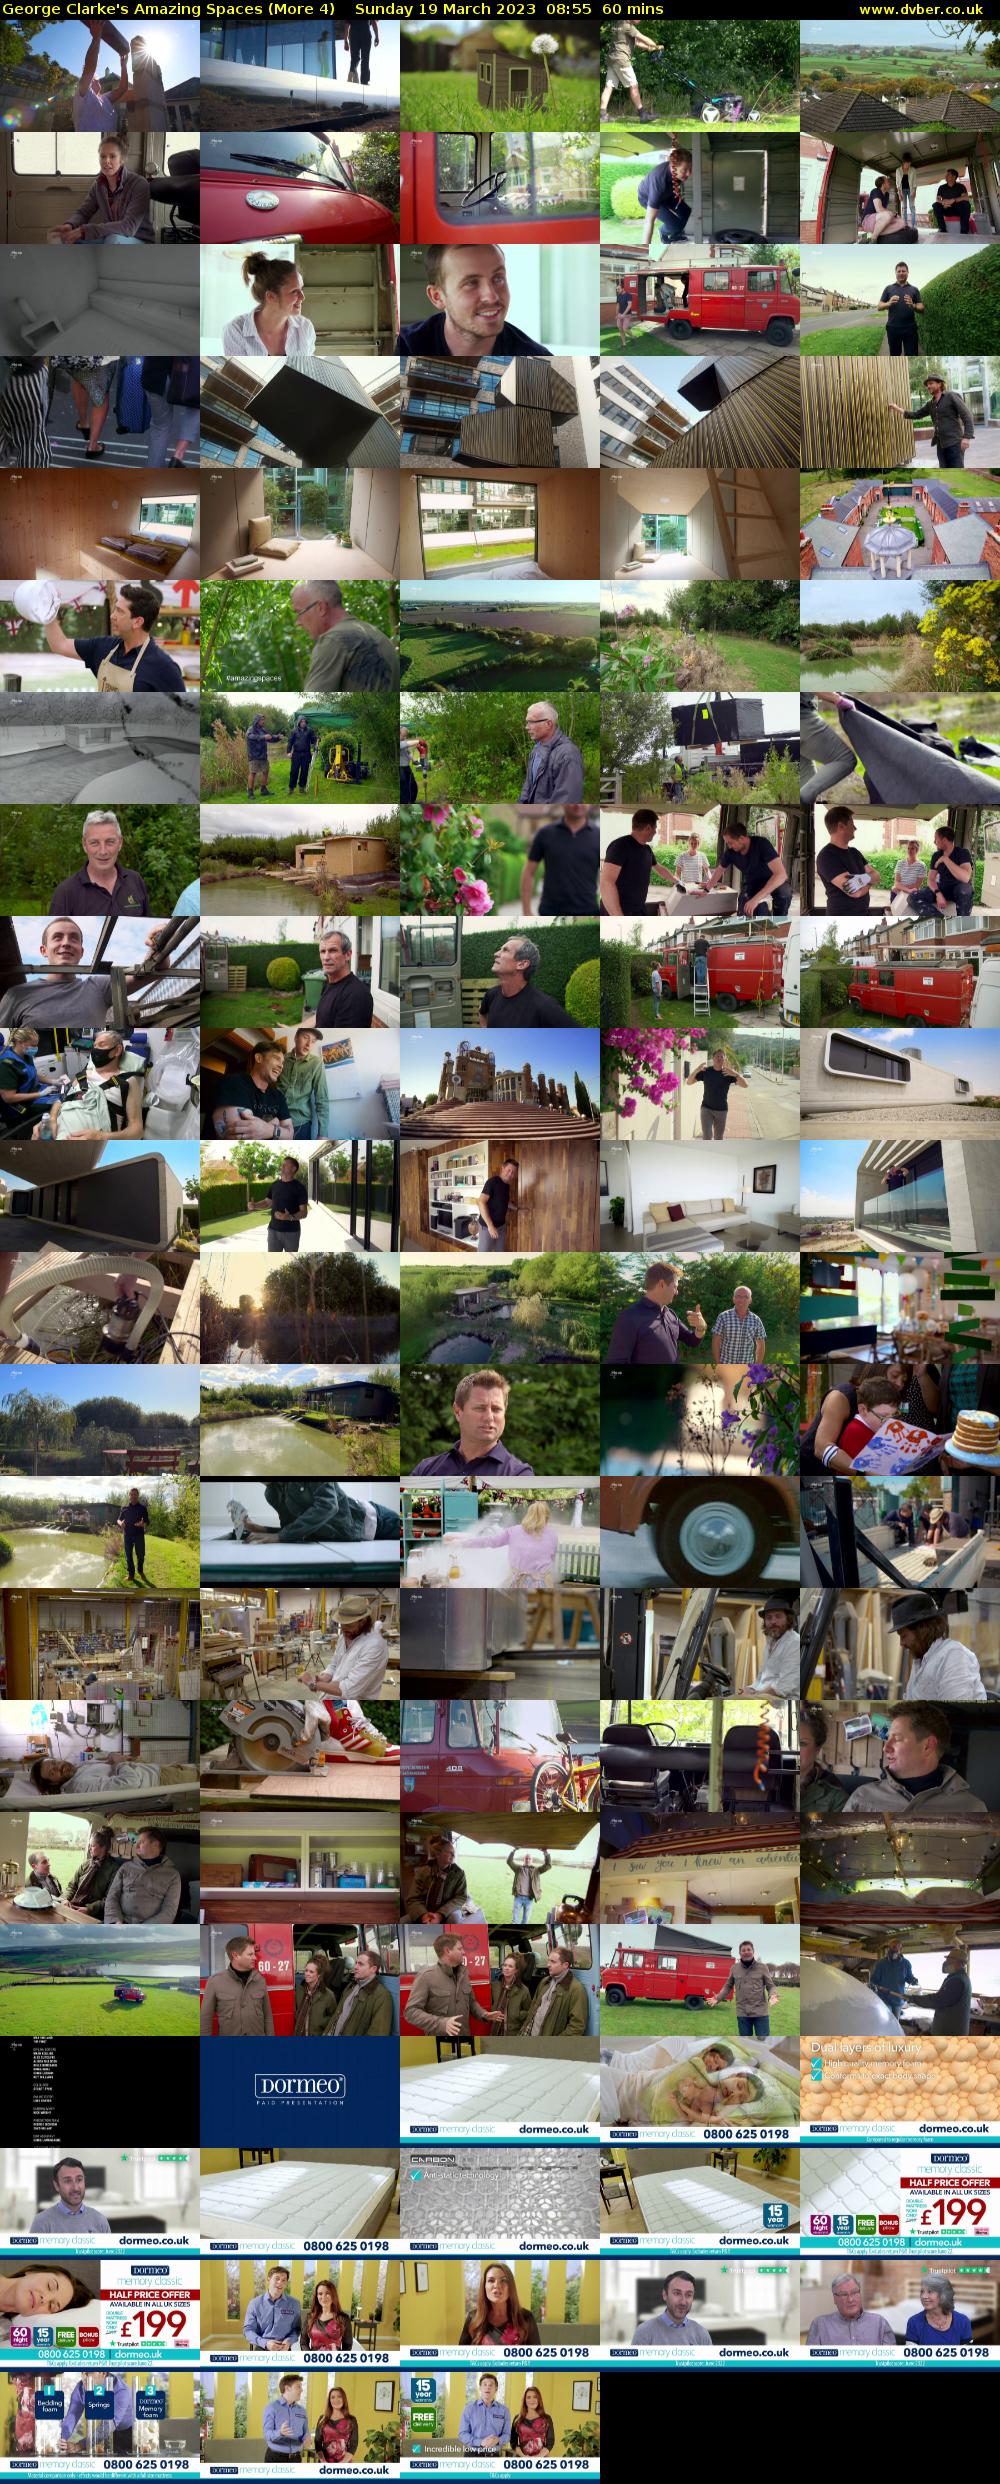 George Clarke's Amazing Spaces (More 4) Sunday 19 March 2023 08:55 - 09:55